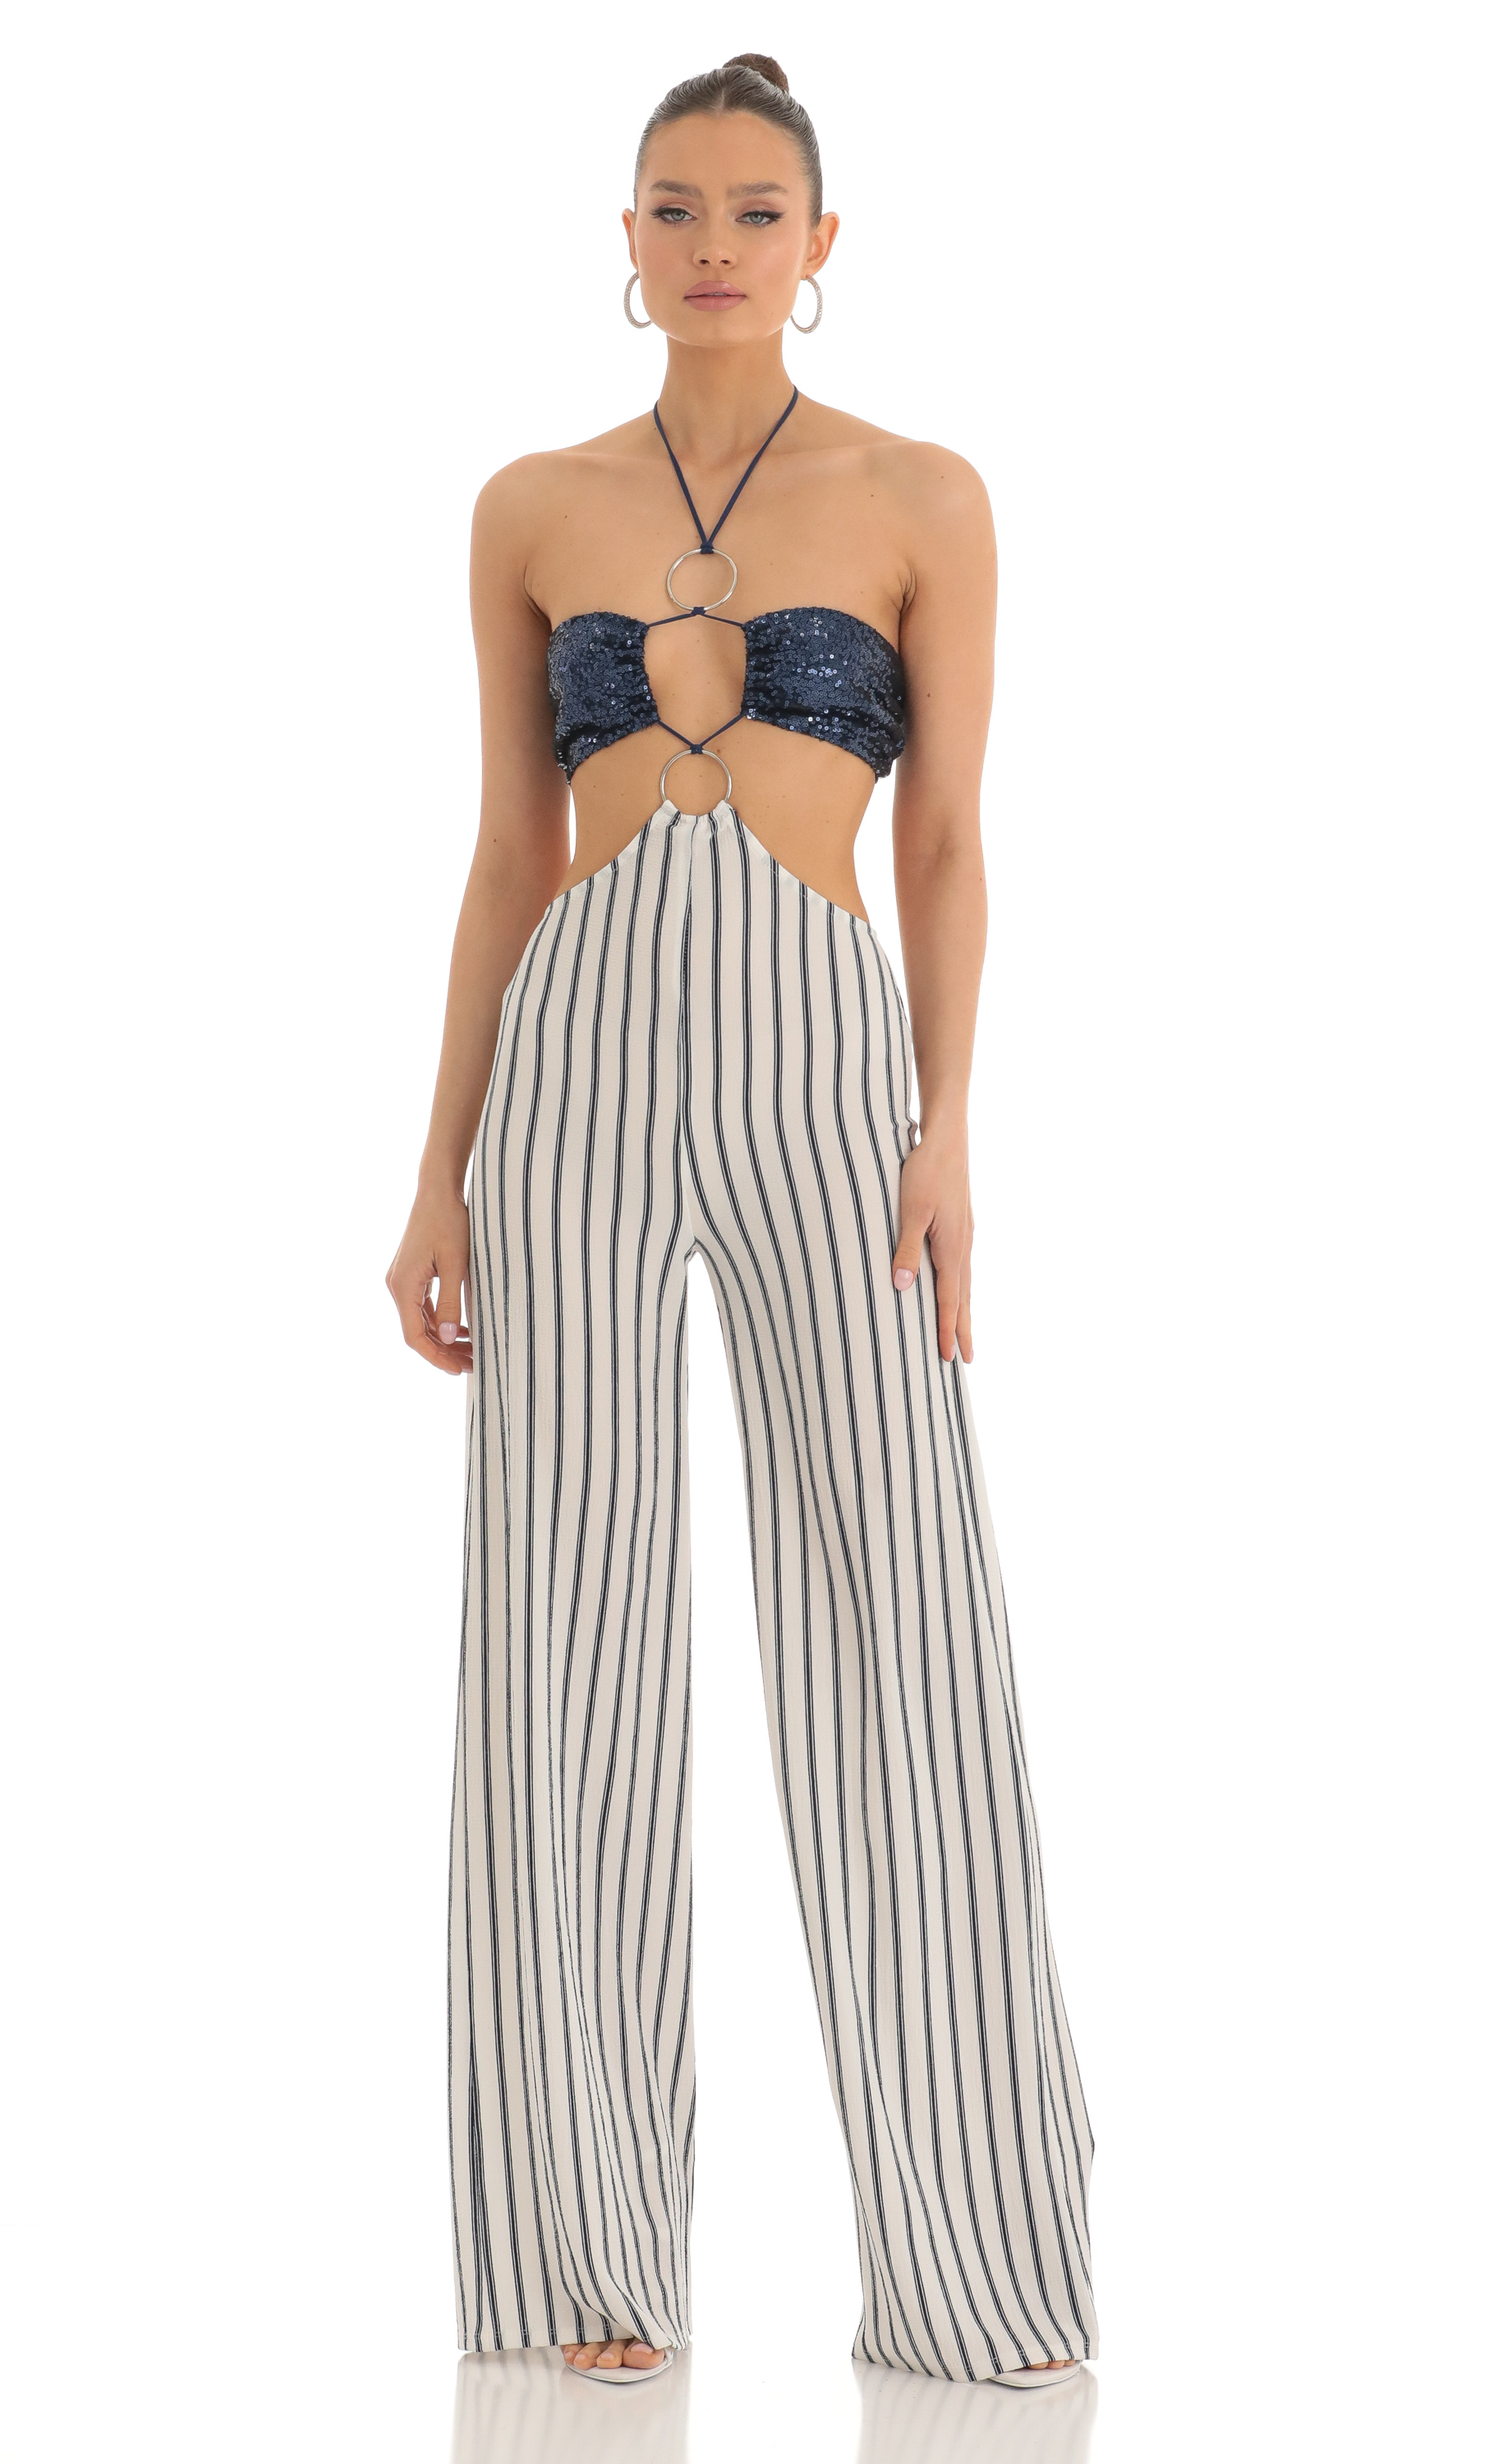 Renae Sequin Halter Striped Jumpsuit in White and Navy